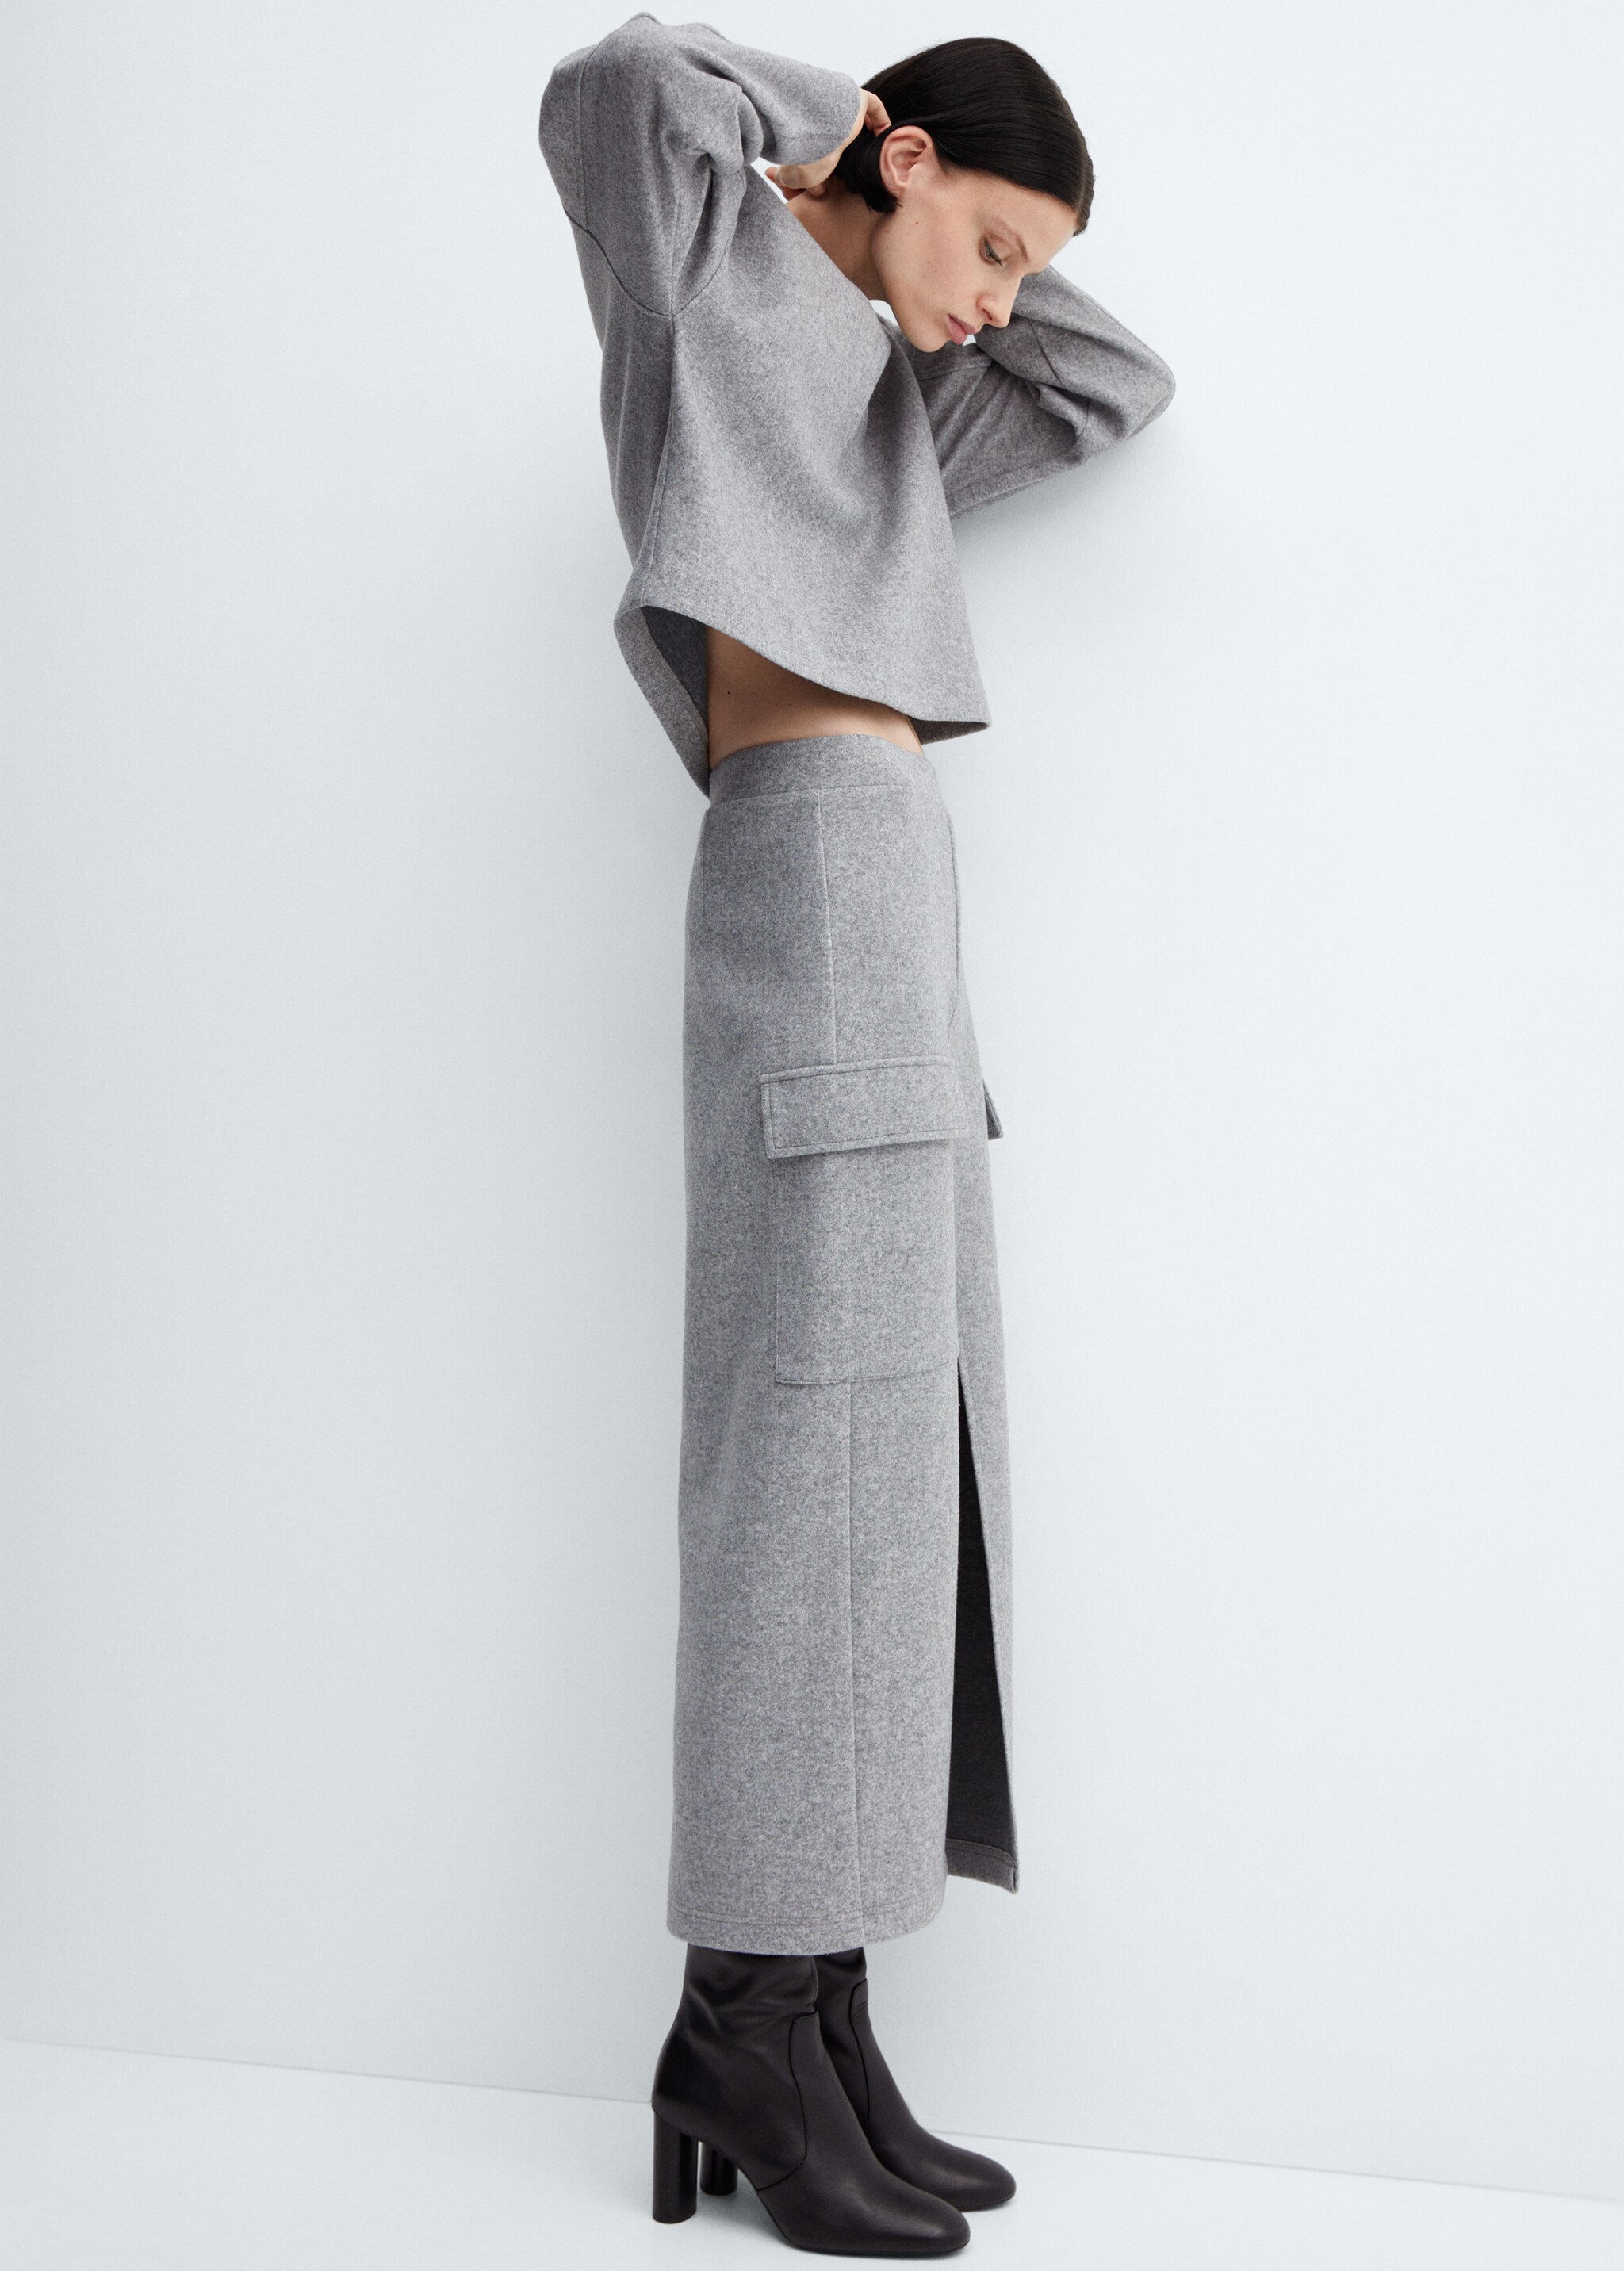 Cargo skirt with slit - Details of the article 2